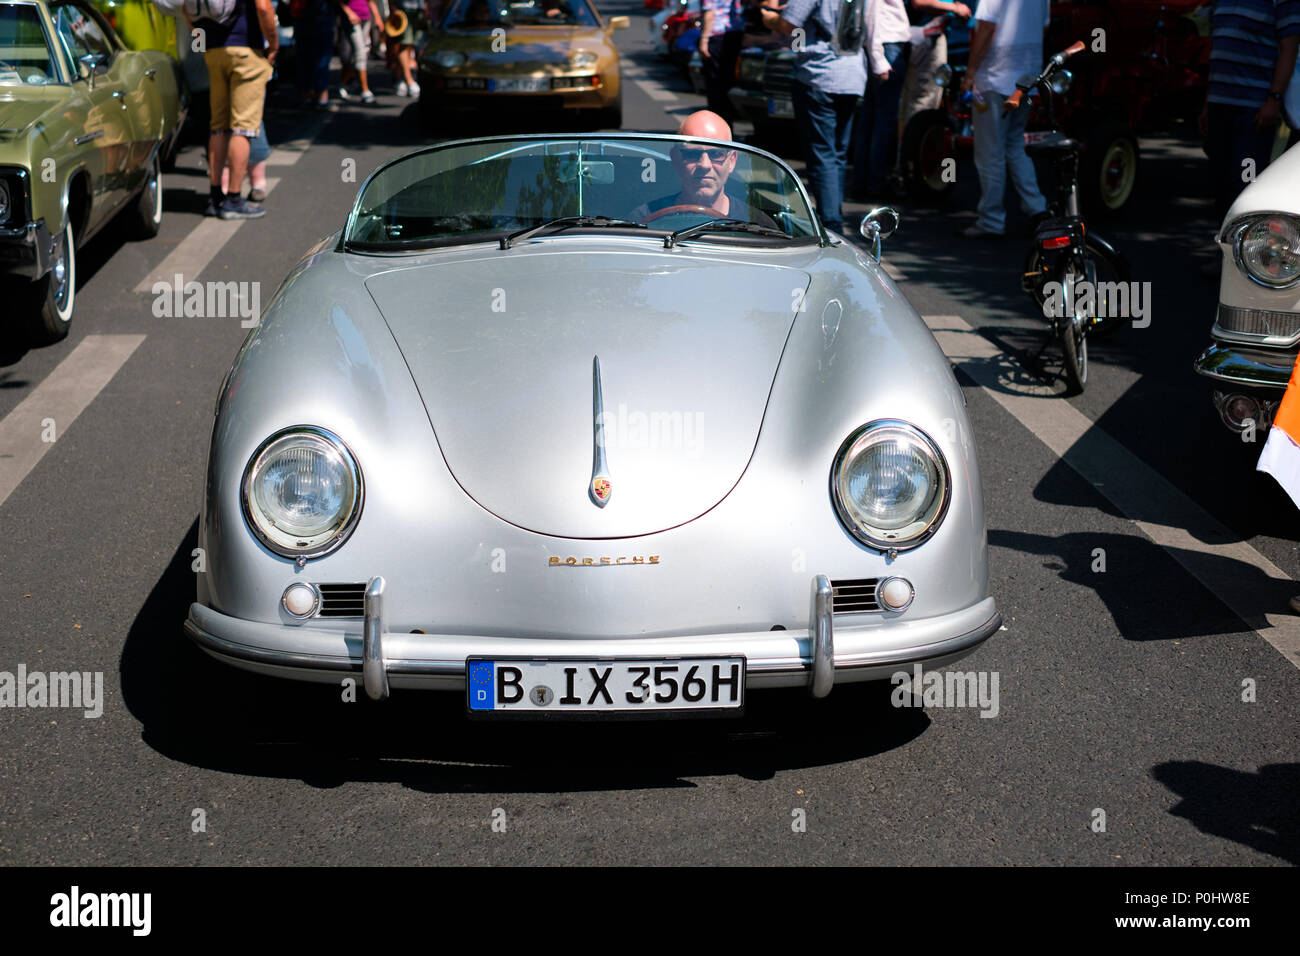 Berlin, Germany - june 09, 2018: Man drives old Porsche at Berlin Classic Days, a Oldtimer automobile event with more than 2000 vintage cars  at Kurfuerstendamm / Kudamm in Berlin Credit: hanohiki/Alamy Live News Stock Photo